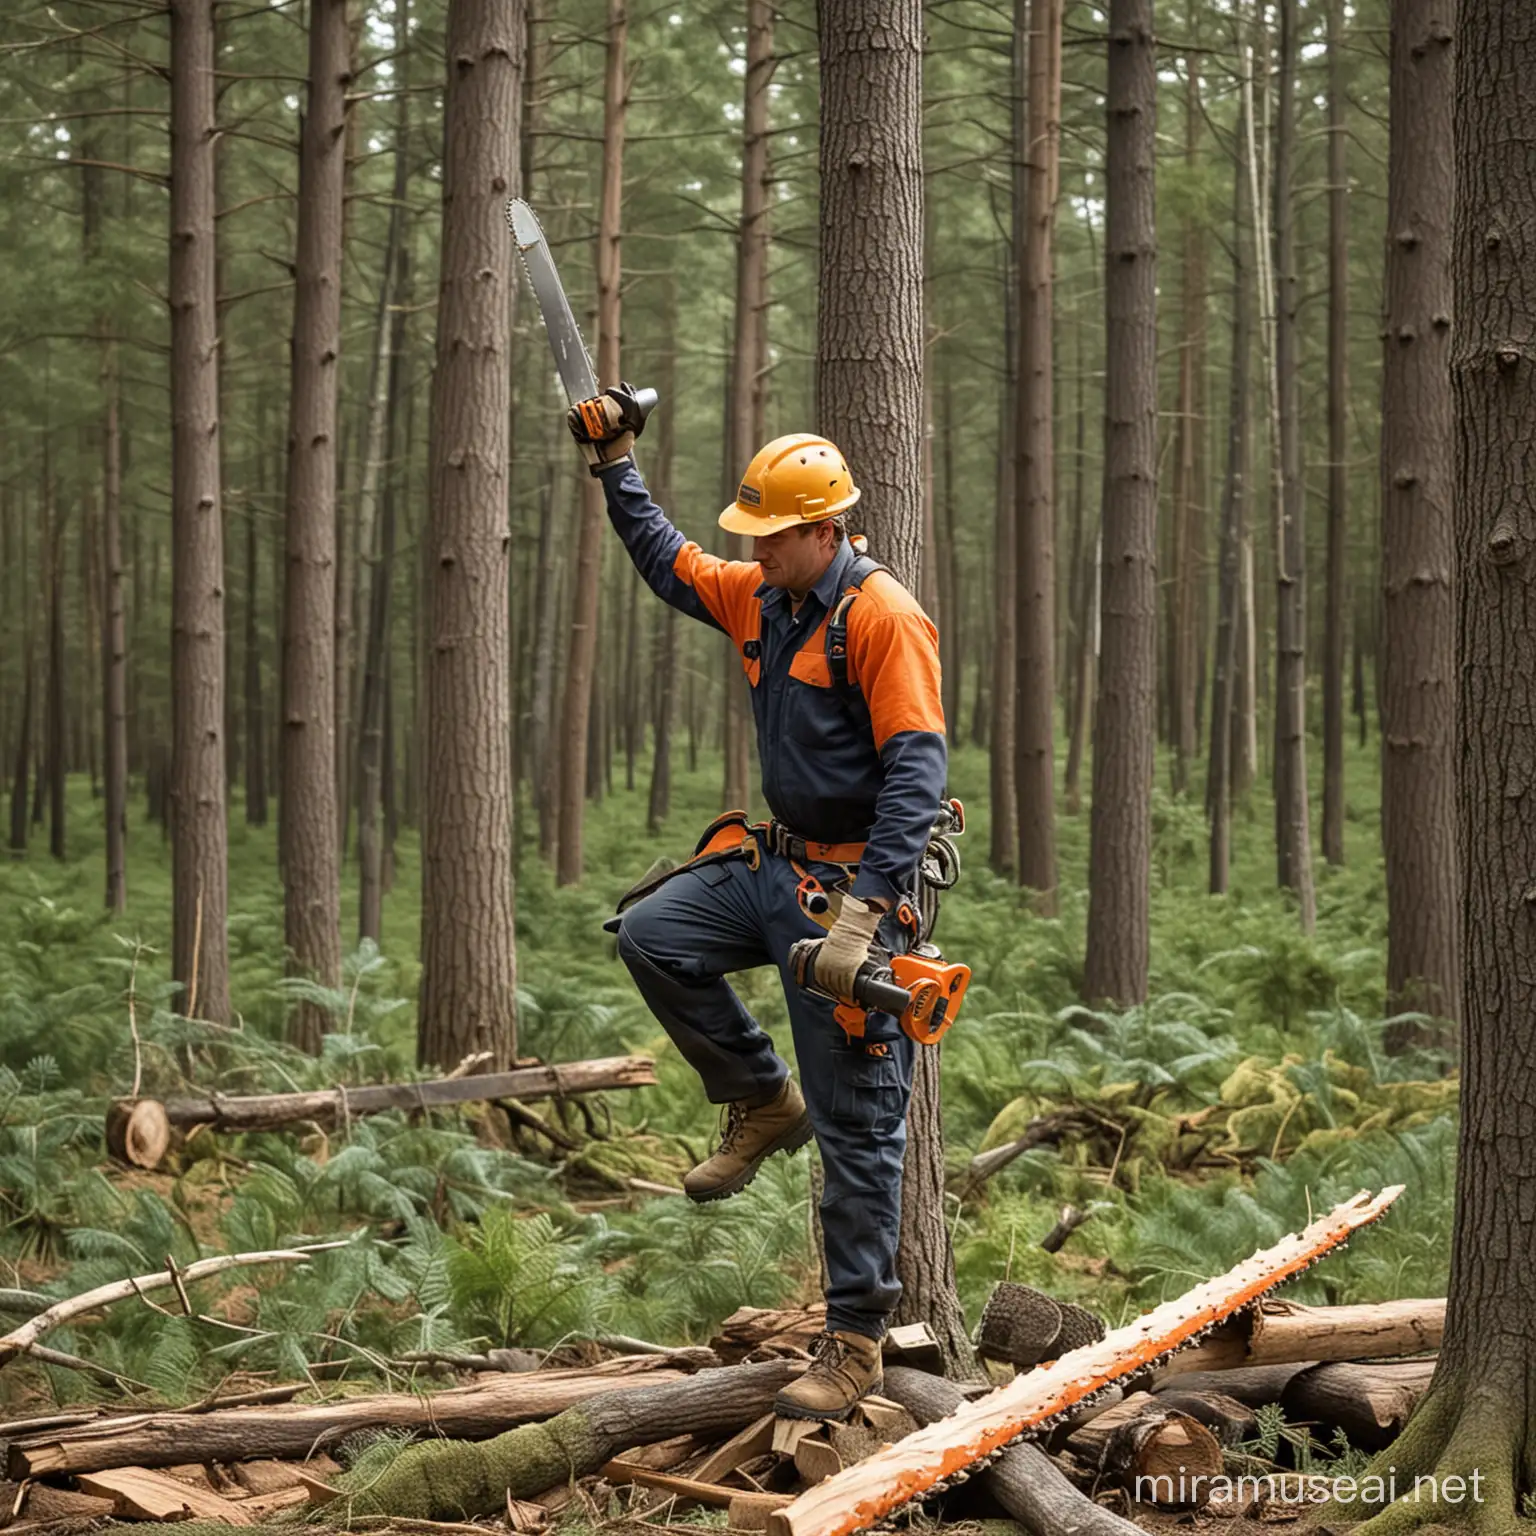 Posture: A forest worker, the back straight, one hand above shoulder level, standing on one straight leg, felling a tree using a chainsaw above the head.